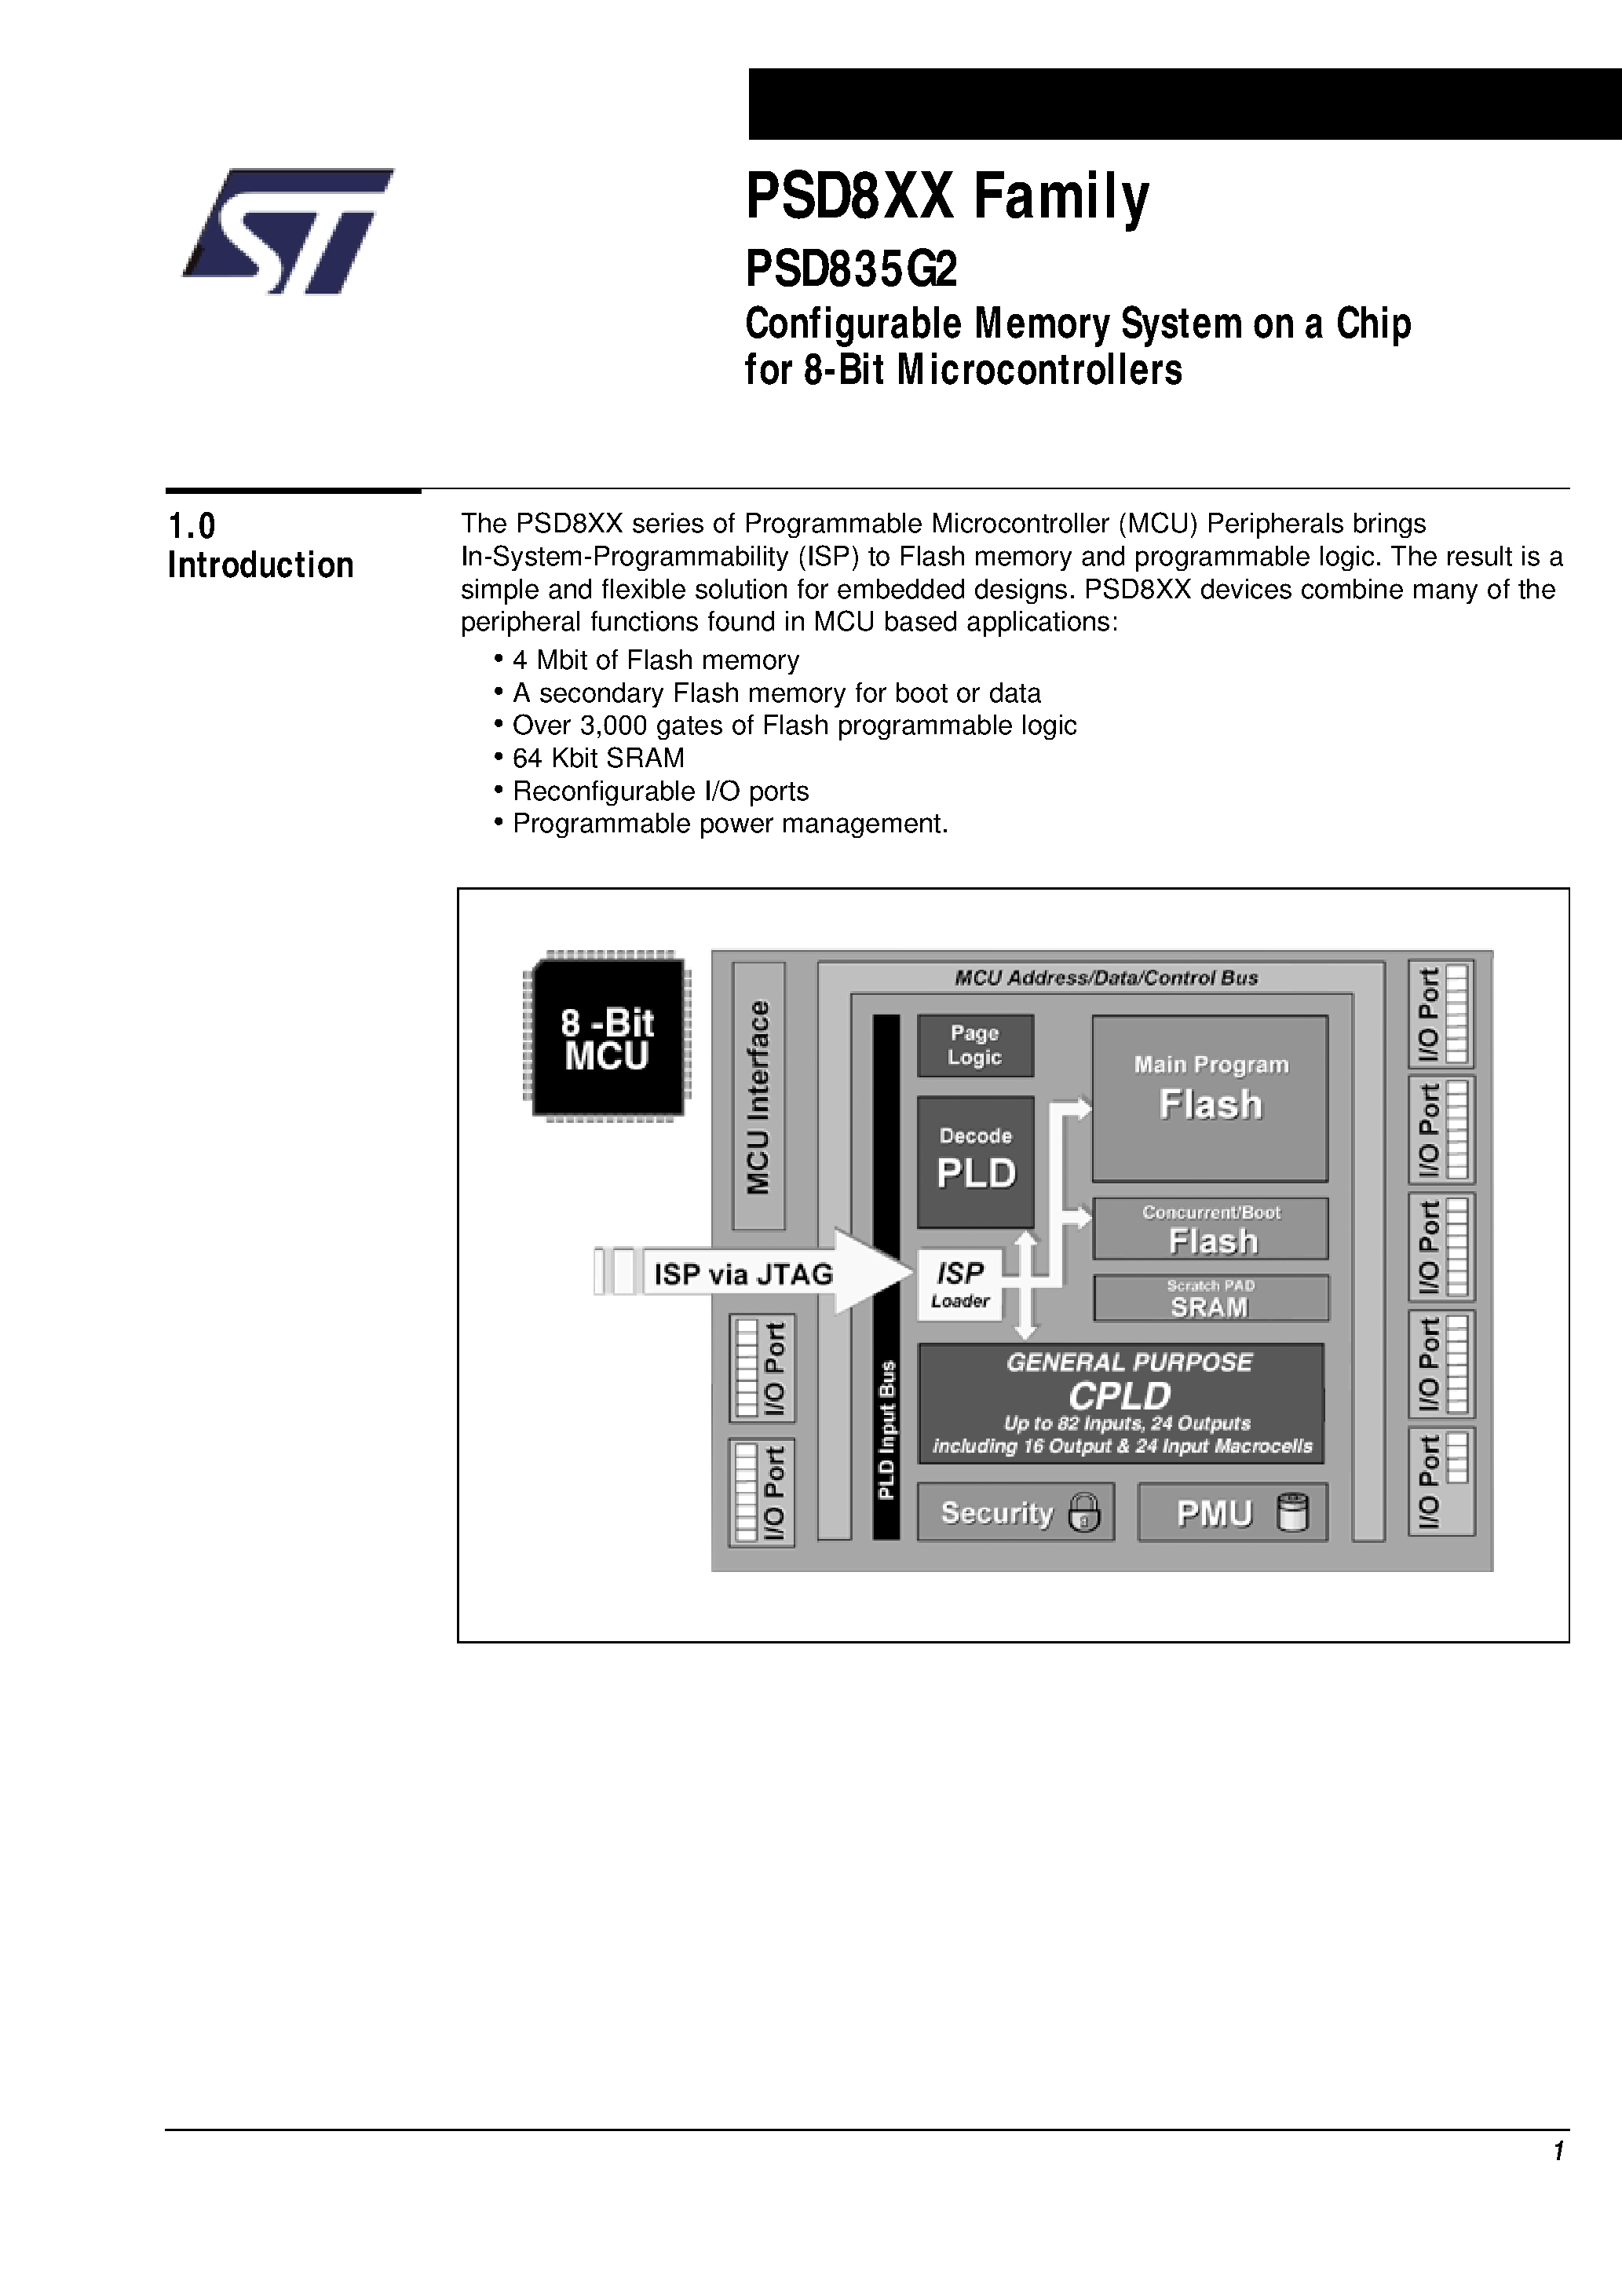 Datasheet PSD835F1V-A-15B81I - Configurable Memory System on a Chip for 8-Bit Microcontrollers page 2